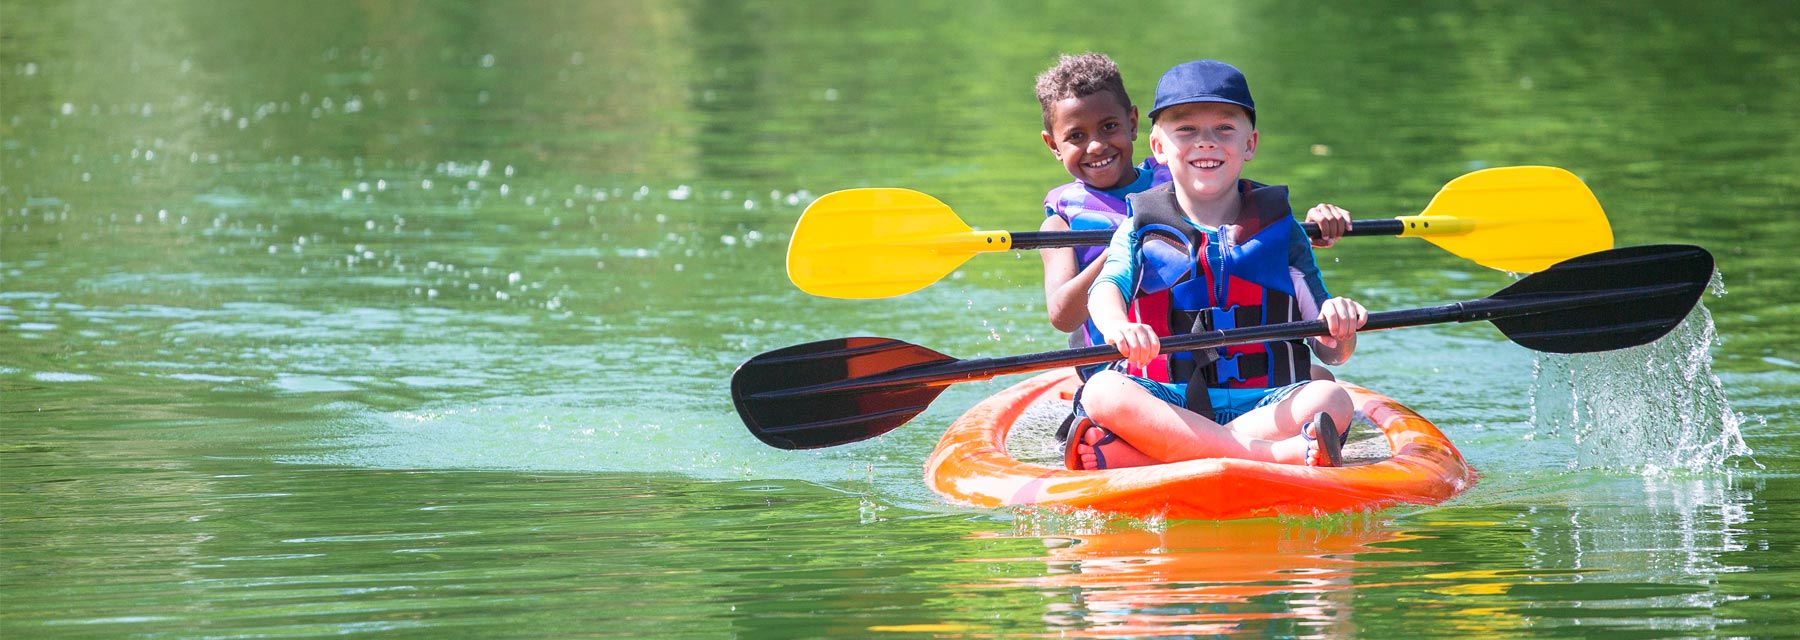 Two young smiling boys wearing multi-colored life vests while paddling in a orange kayak on a calm green lake